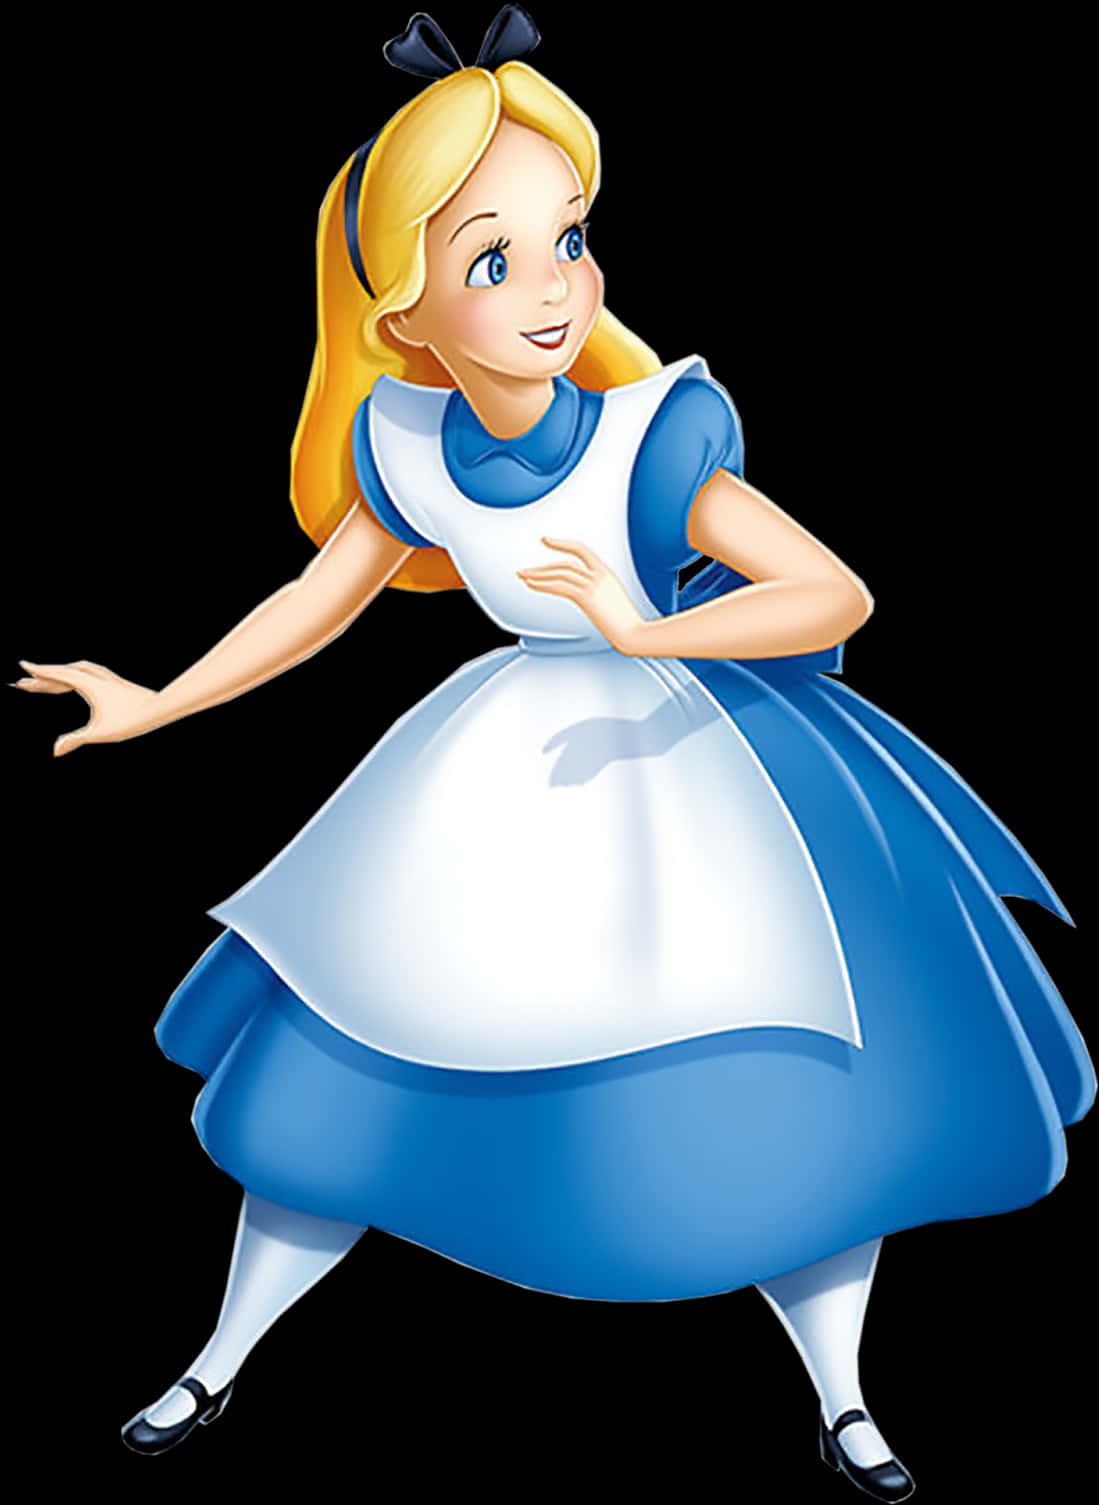 A Cartoon Of A Woman In A Blue And White Dress